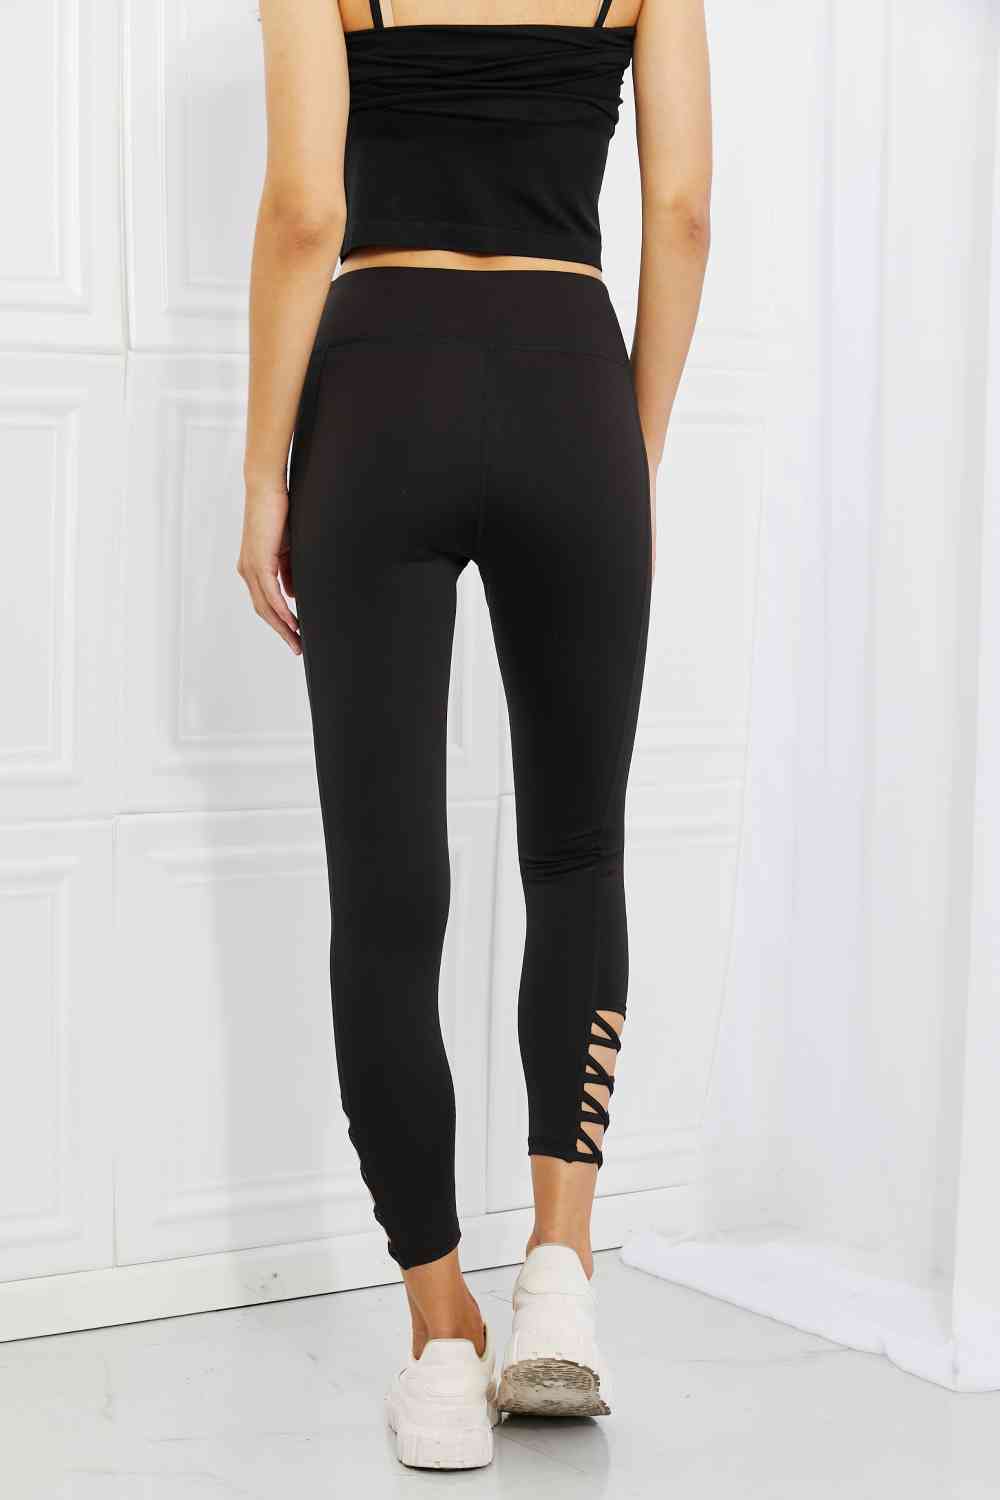 Womens Black Strappy Ankle Cutout Athletic Leggings